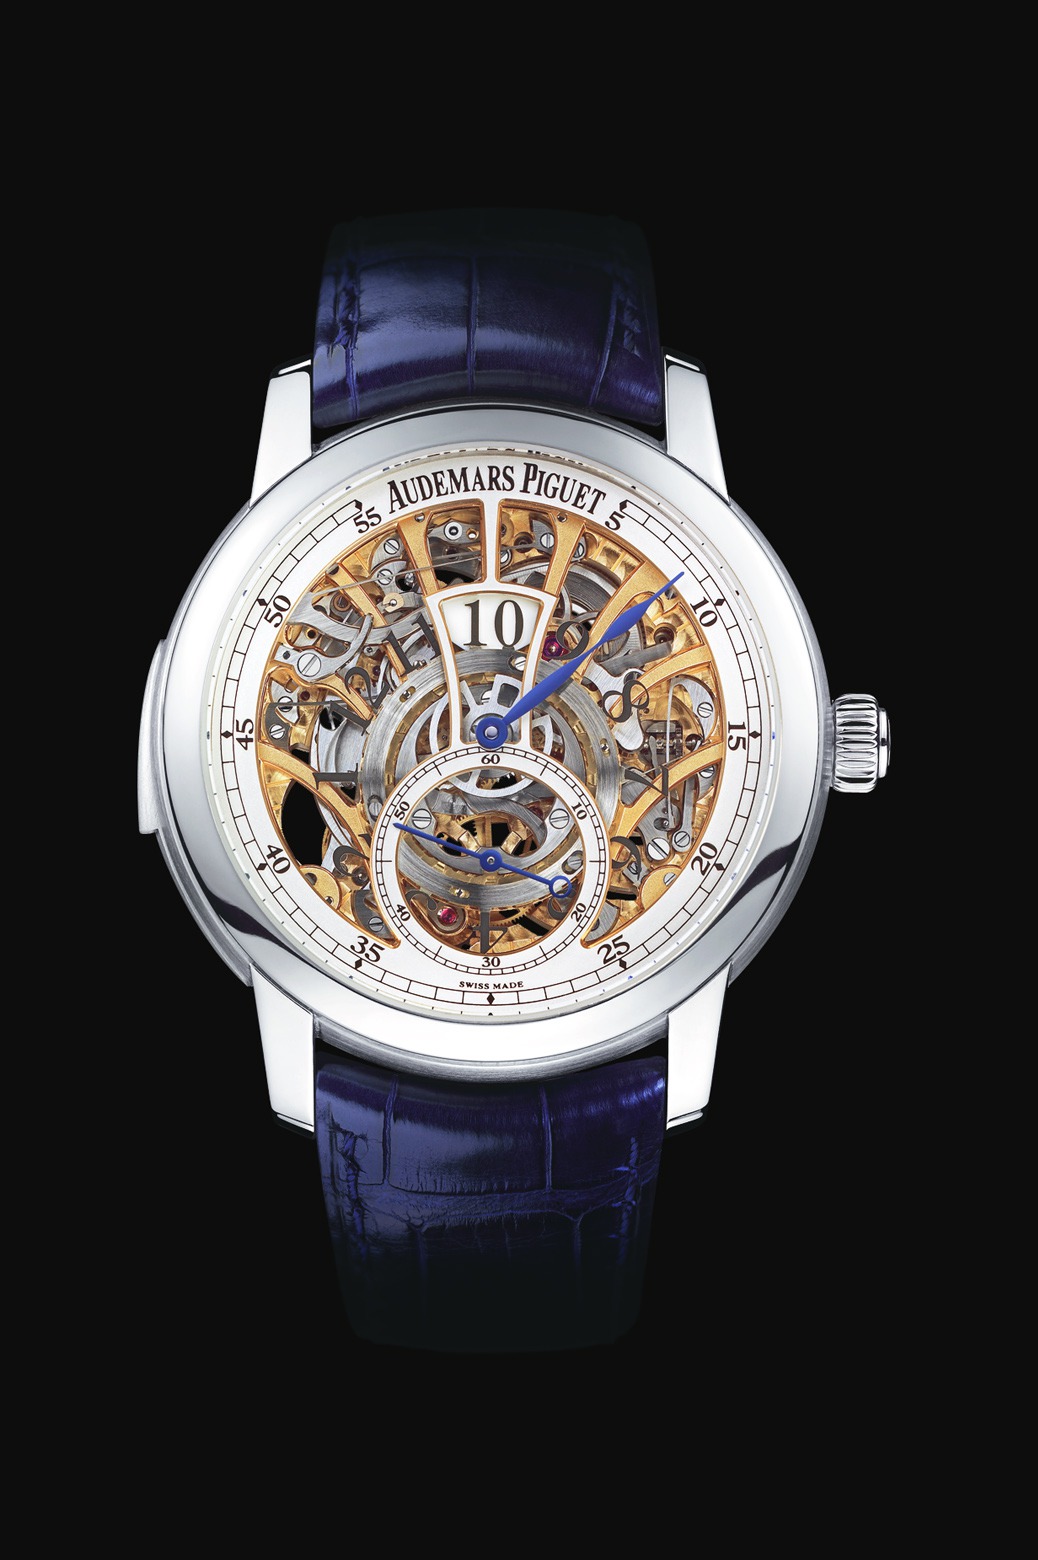 Audemars Piguet Jules Audemars Minute Repeater with Jumping Hour and Small Seconds Platinum watch REF: 26356PT.OO.D028CR.01 - Click Image to Close